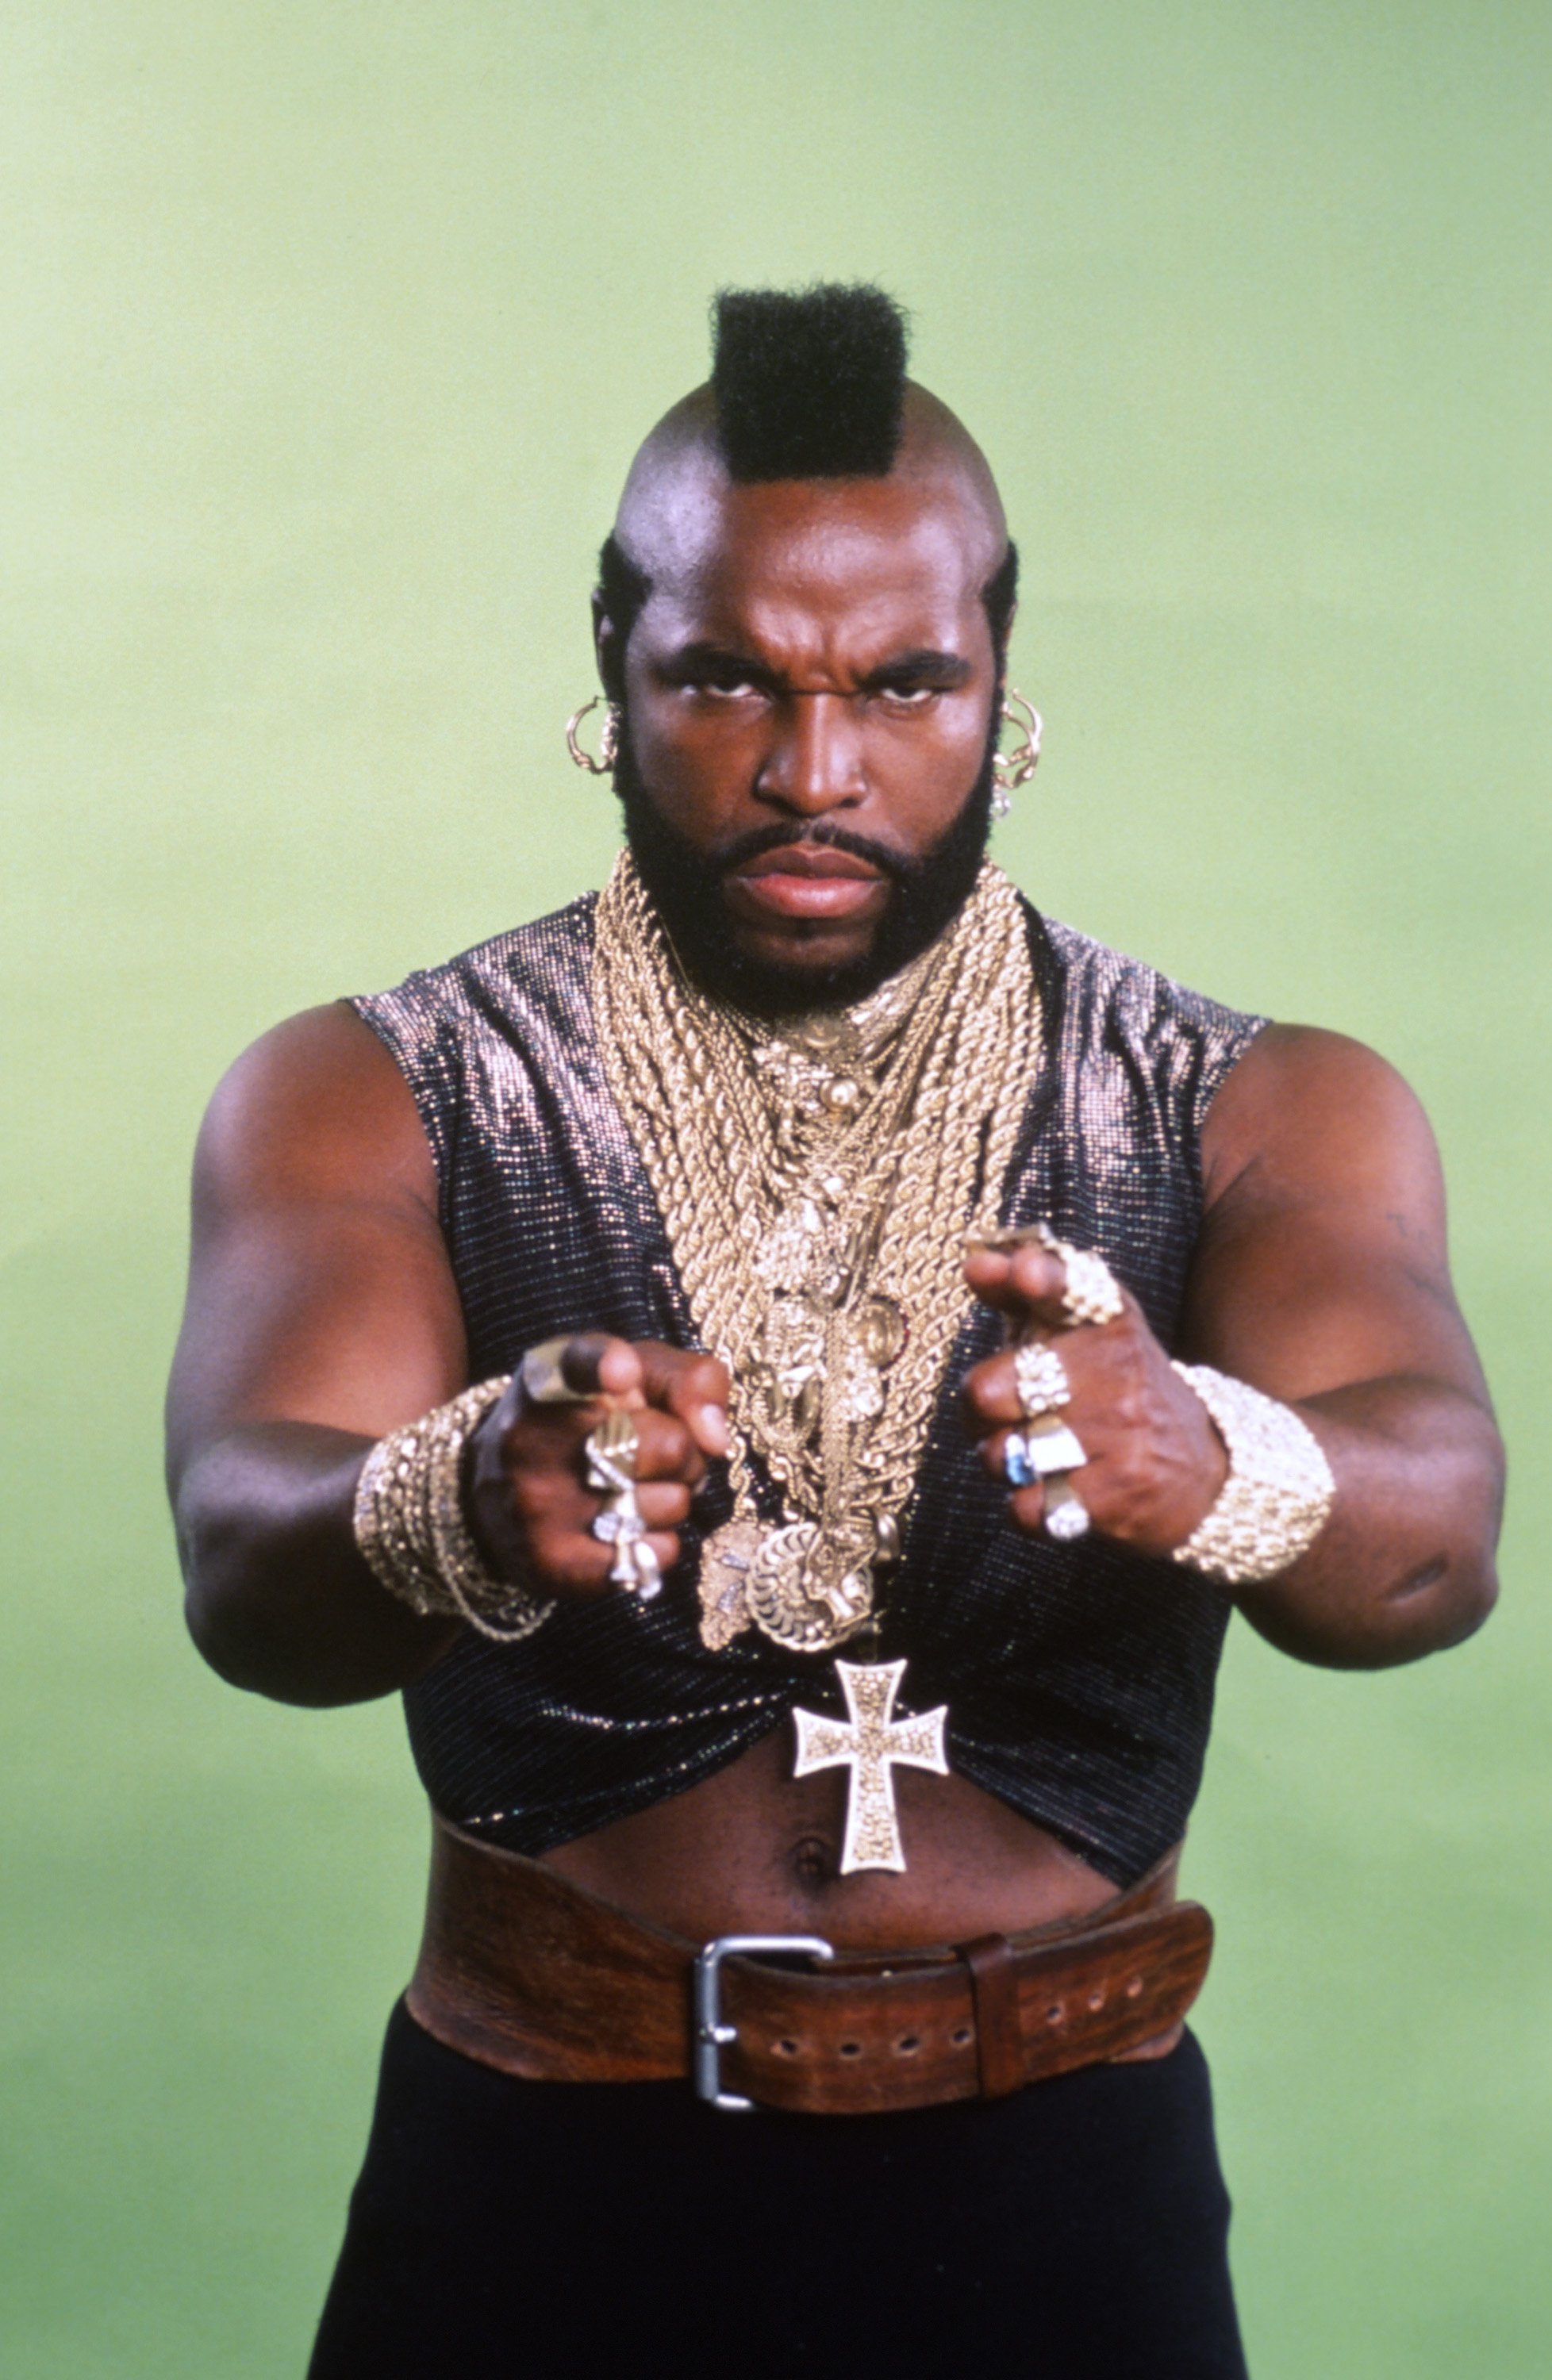  Mr. T as B.A. Baracus in "The A Team" series. | Photo: Getty Images